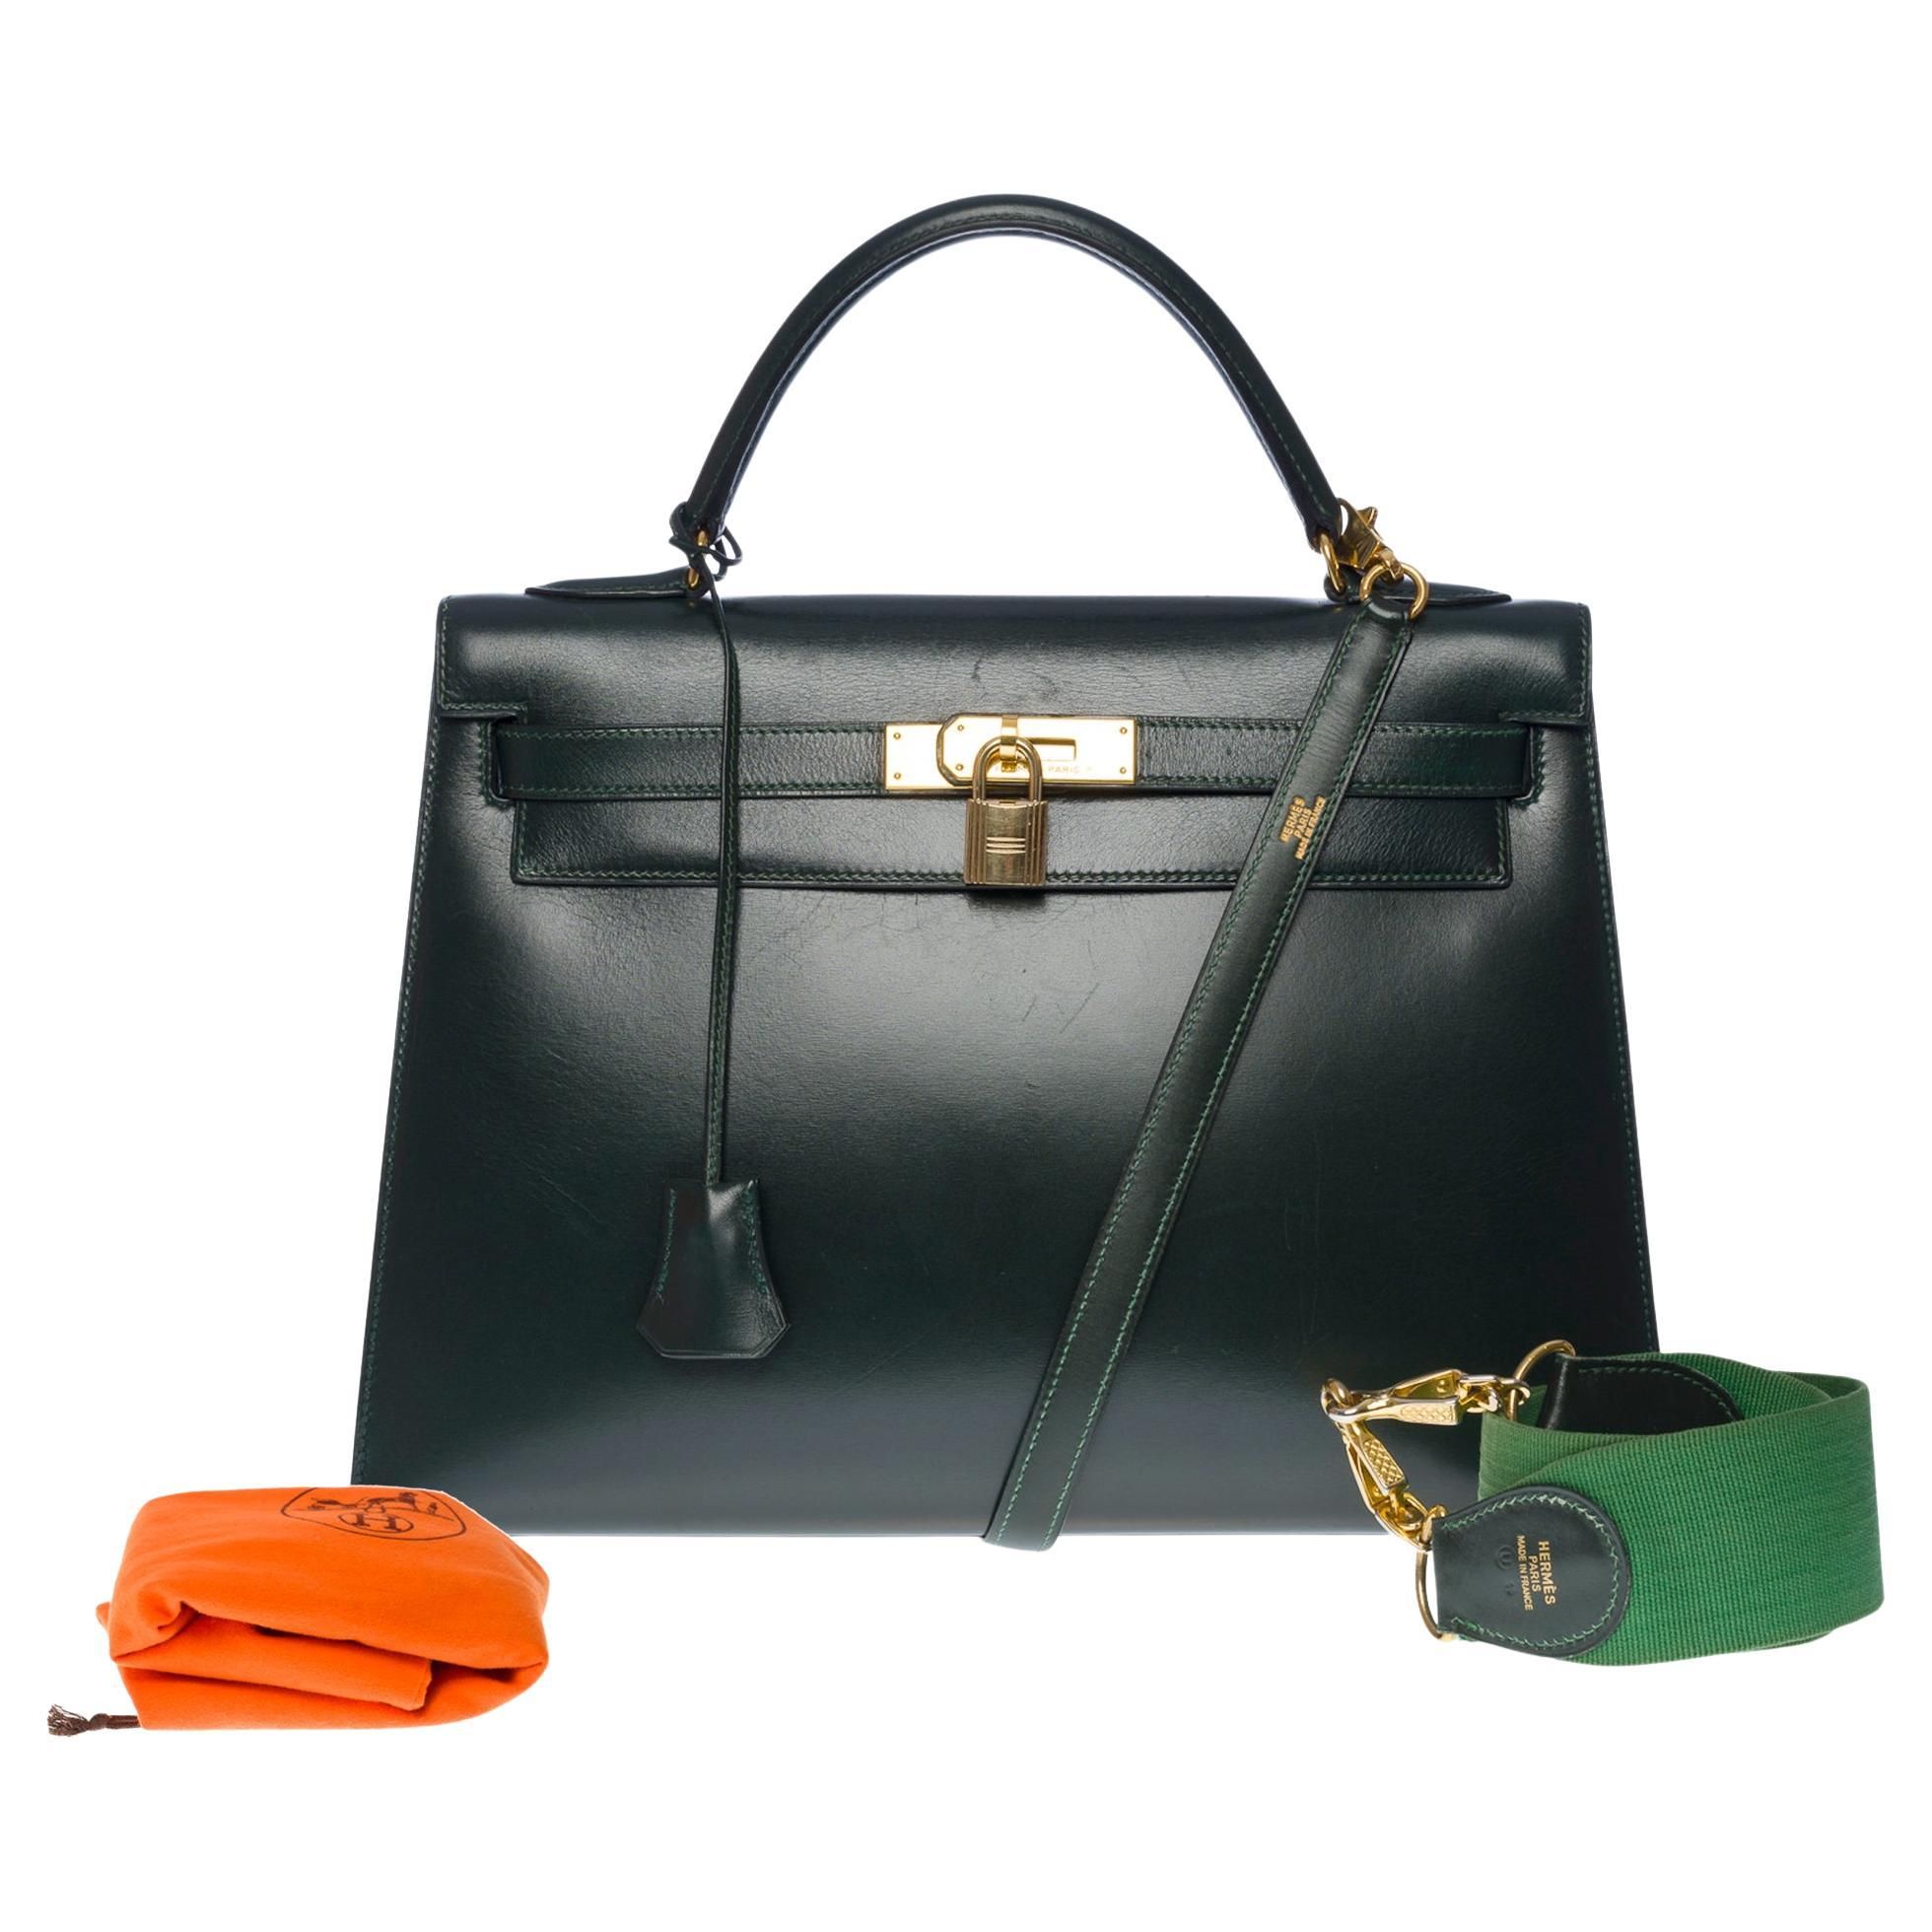 Rare Hermès Kelly 32 sellier handbag double straps in green box calf leather, GHW | 1stDibs